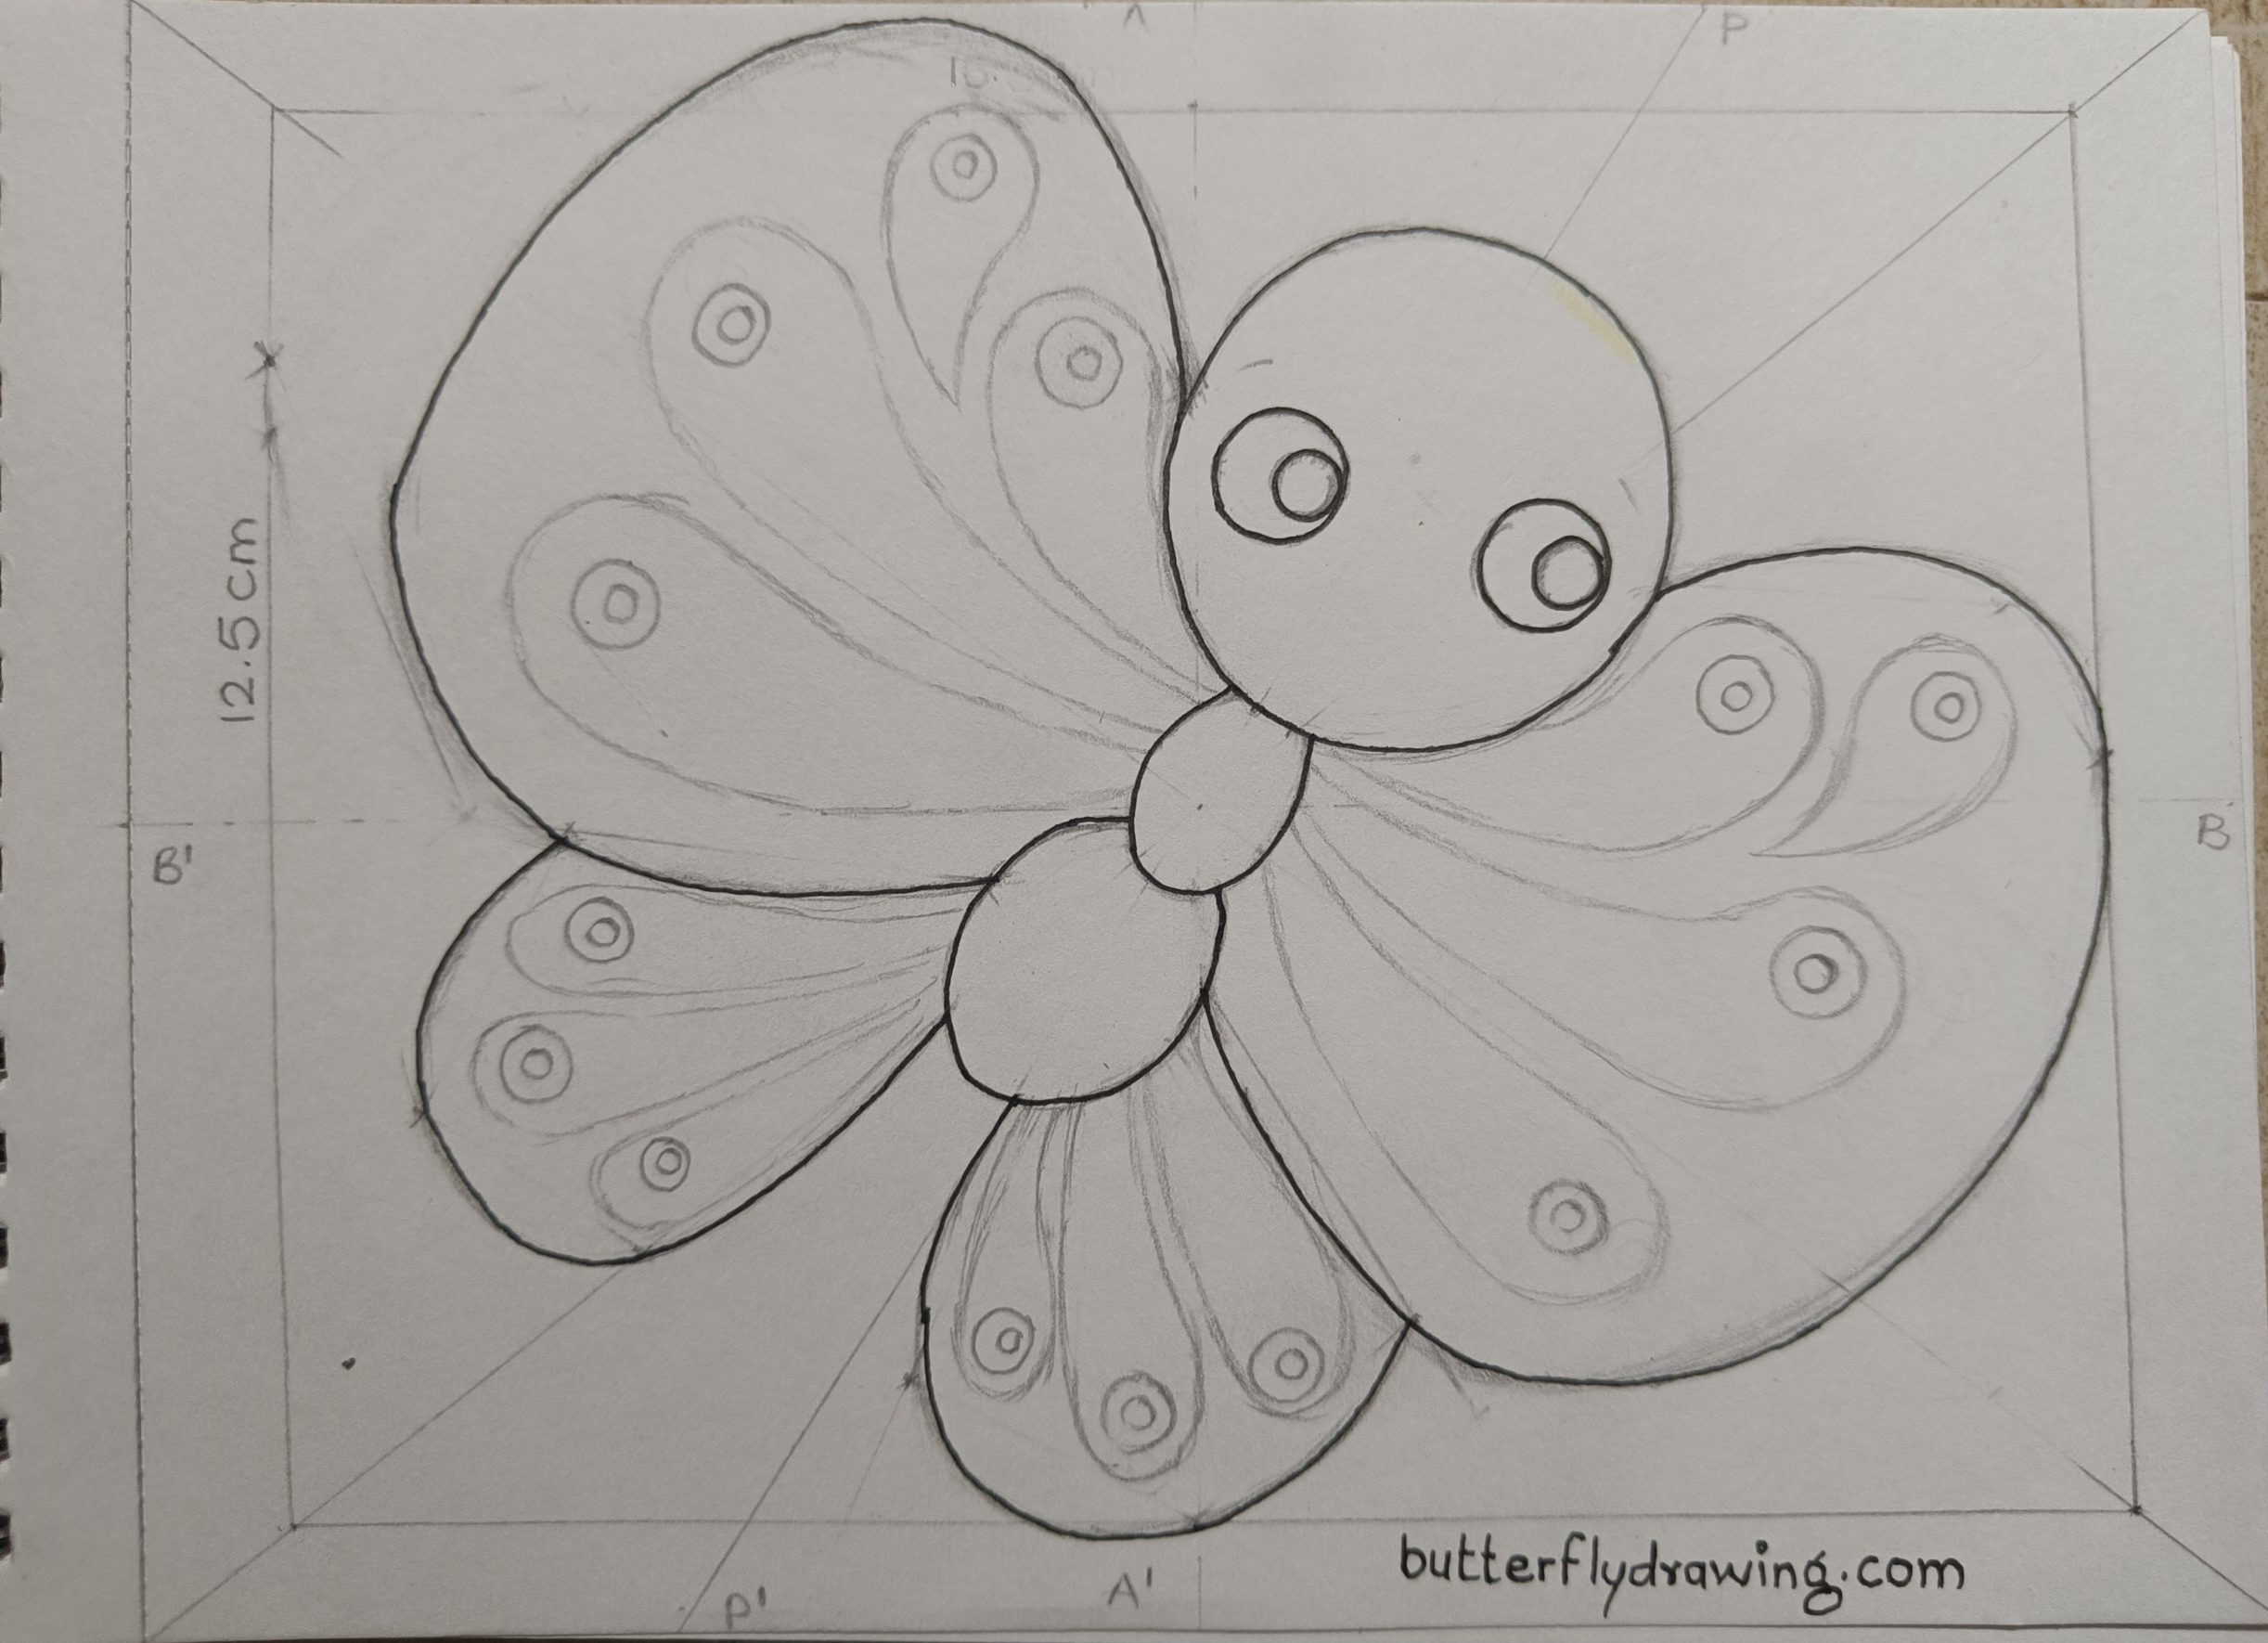 butterfly drawing for kids